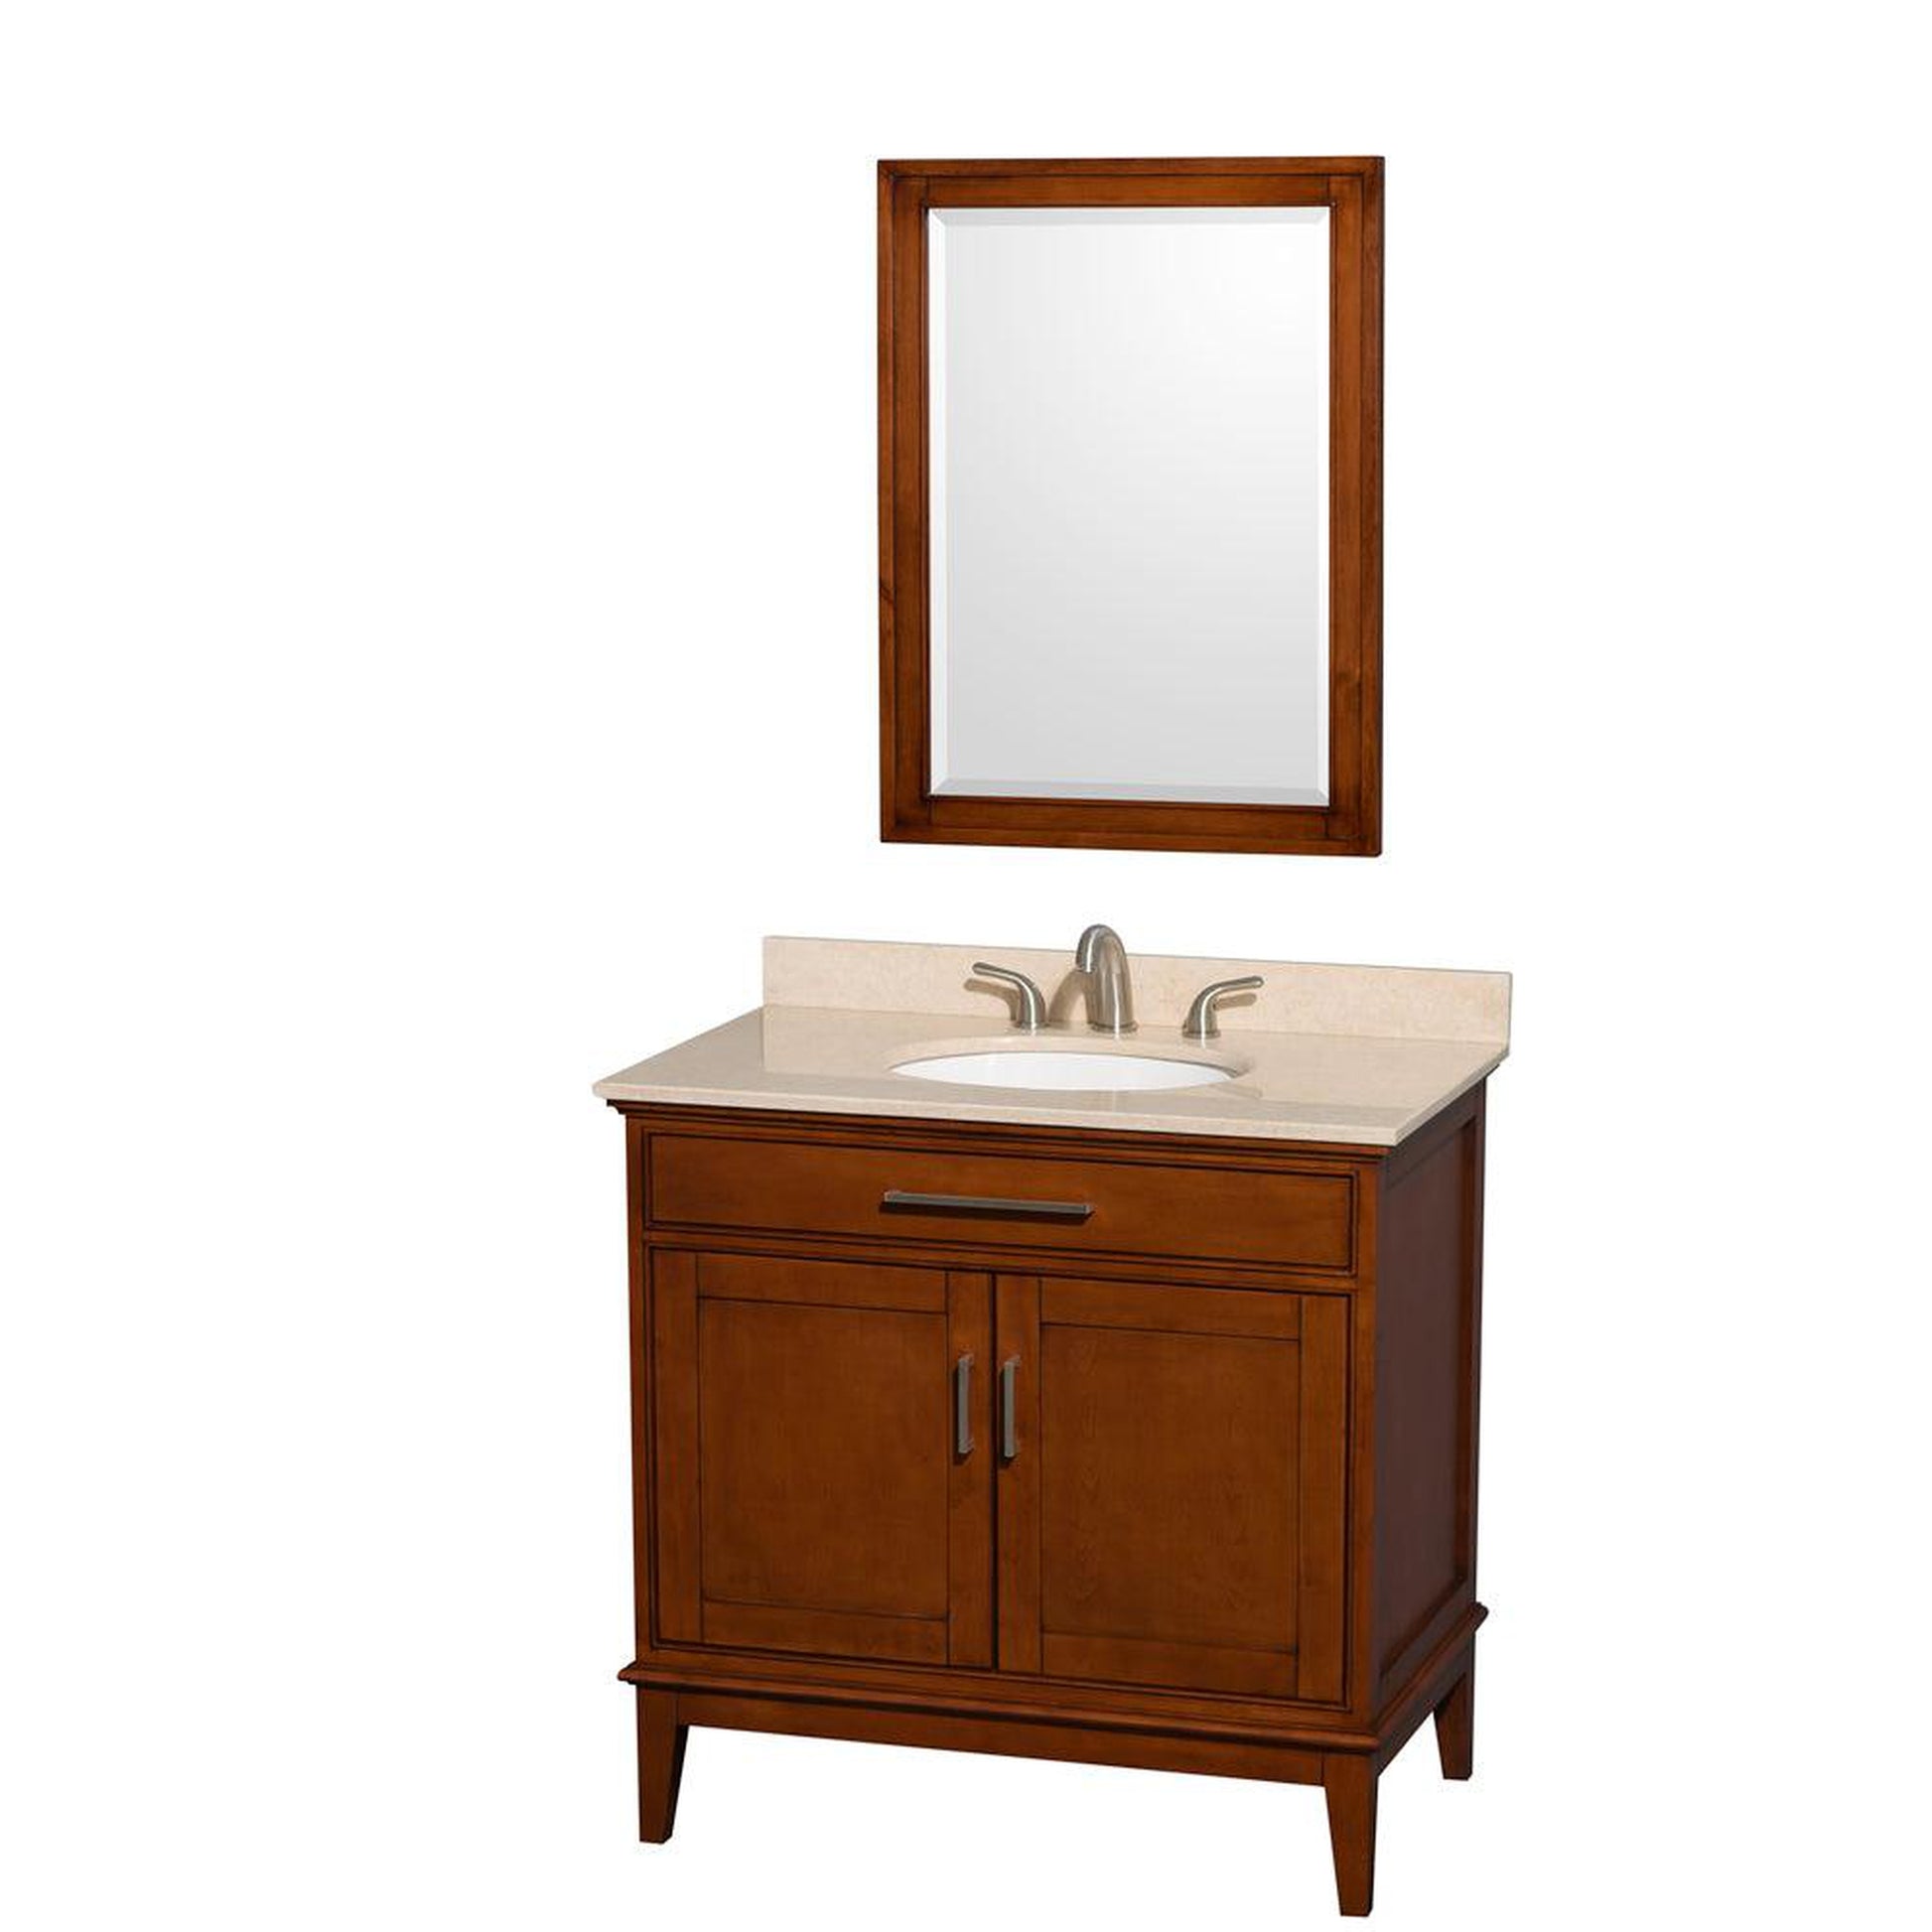 Wyndham Collection Hatton 36" Single Bathroom Vanity in Light Chestnut, Ivory Marble Countertop, Undermount Oval Sink, and 24" Mirror